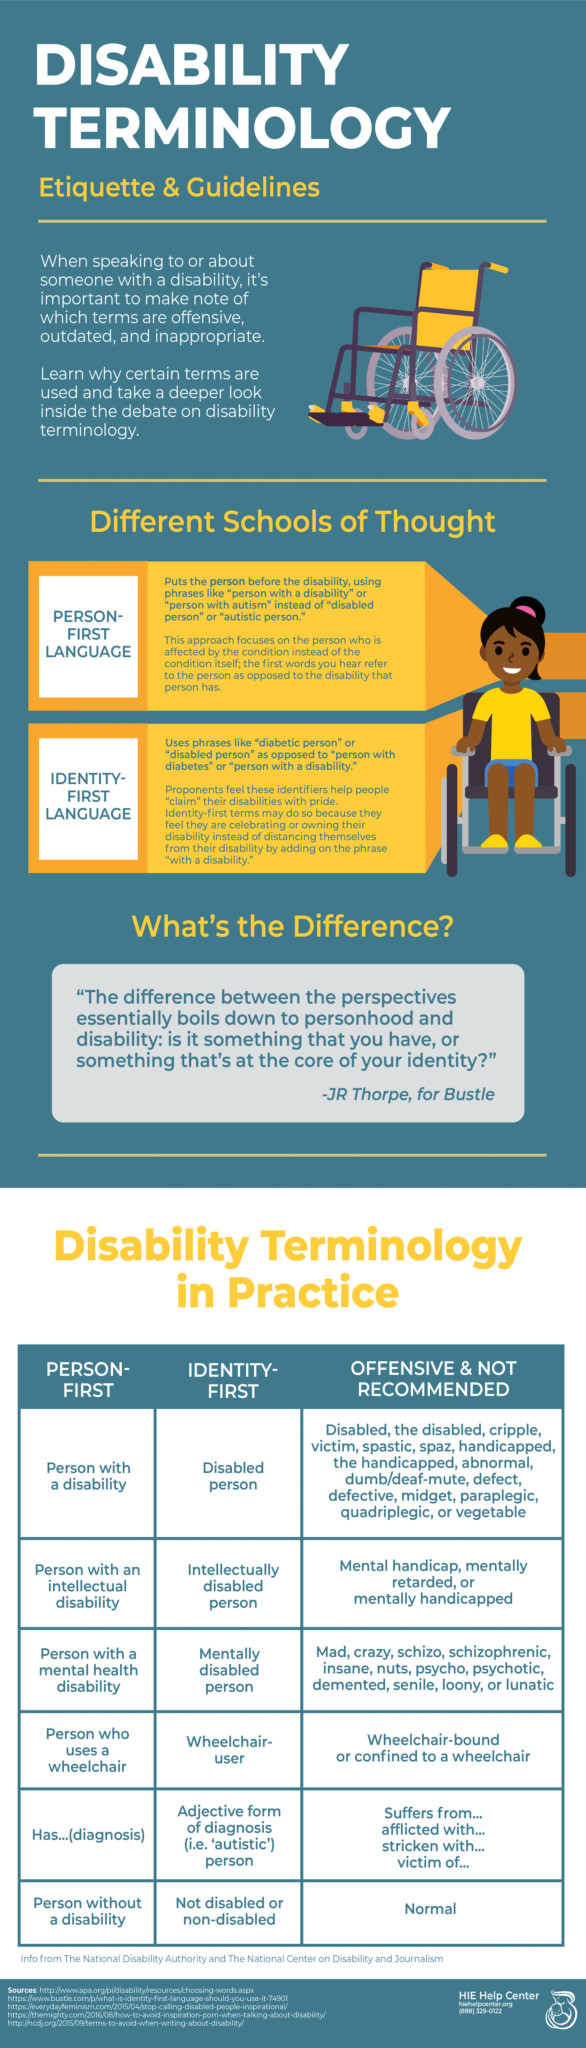 Disability Terminology and Etiquette